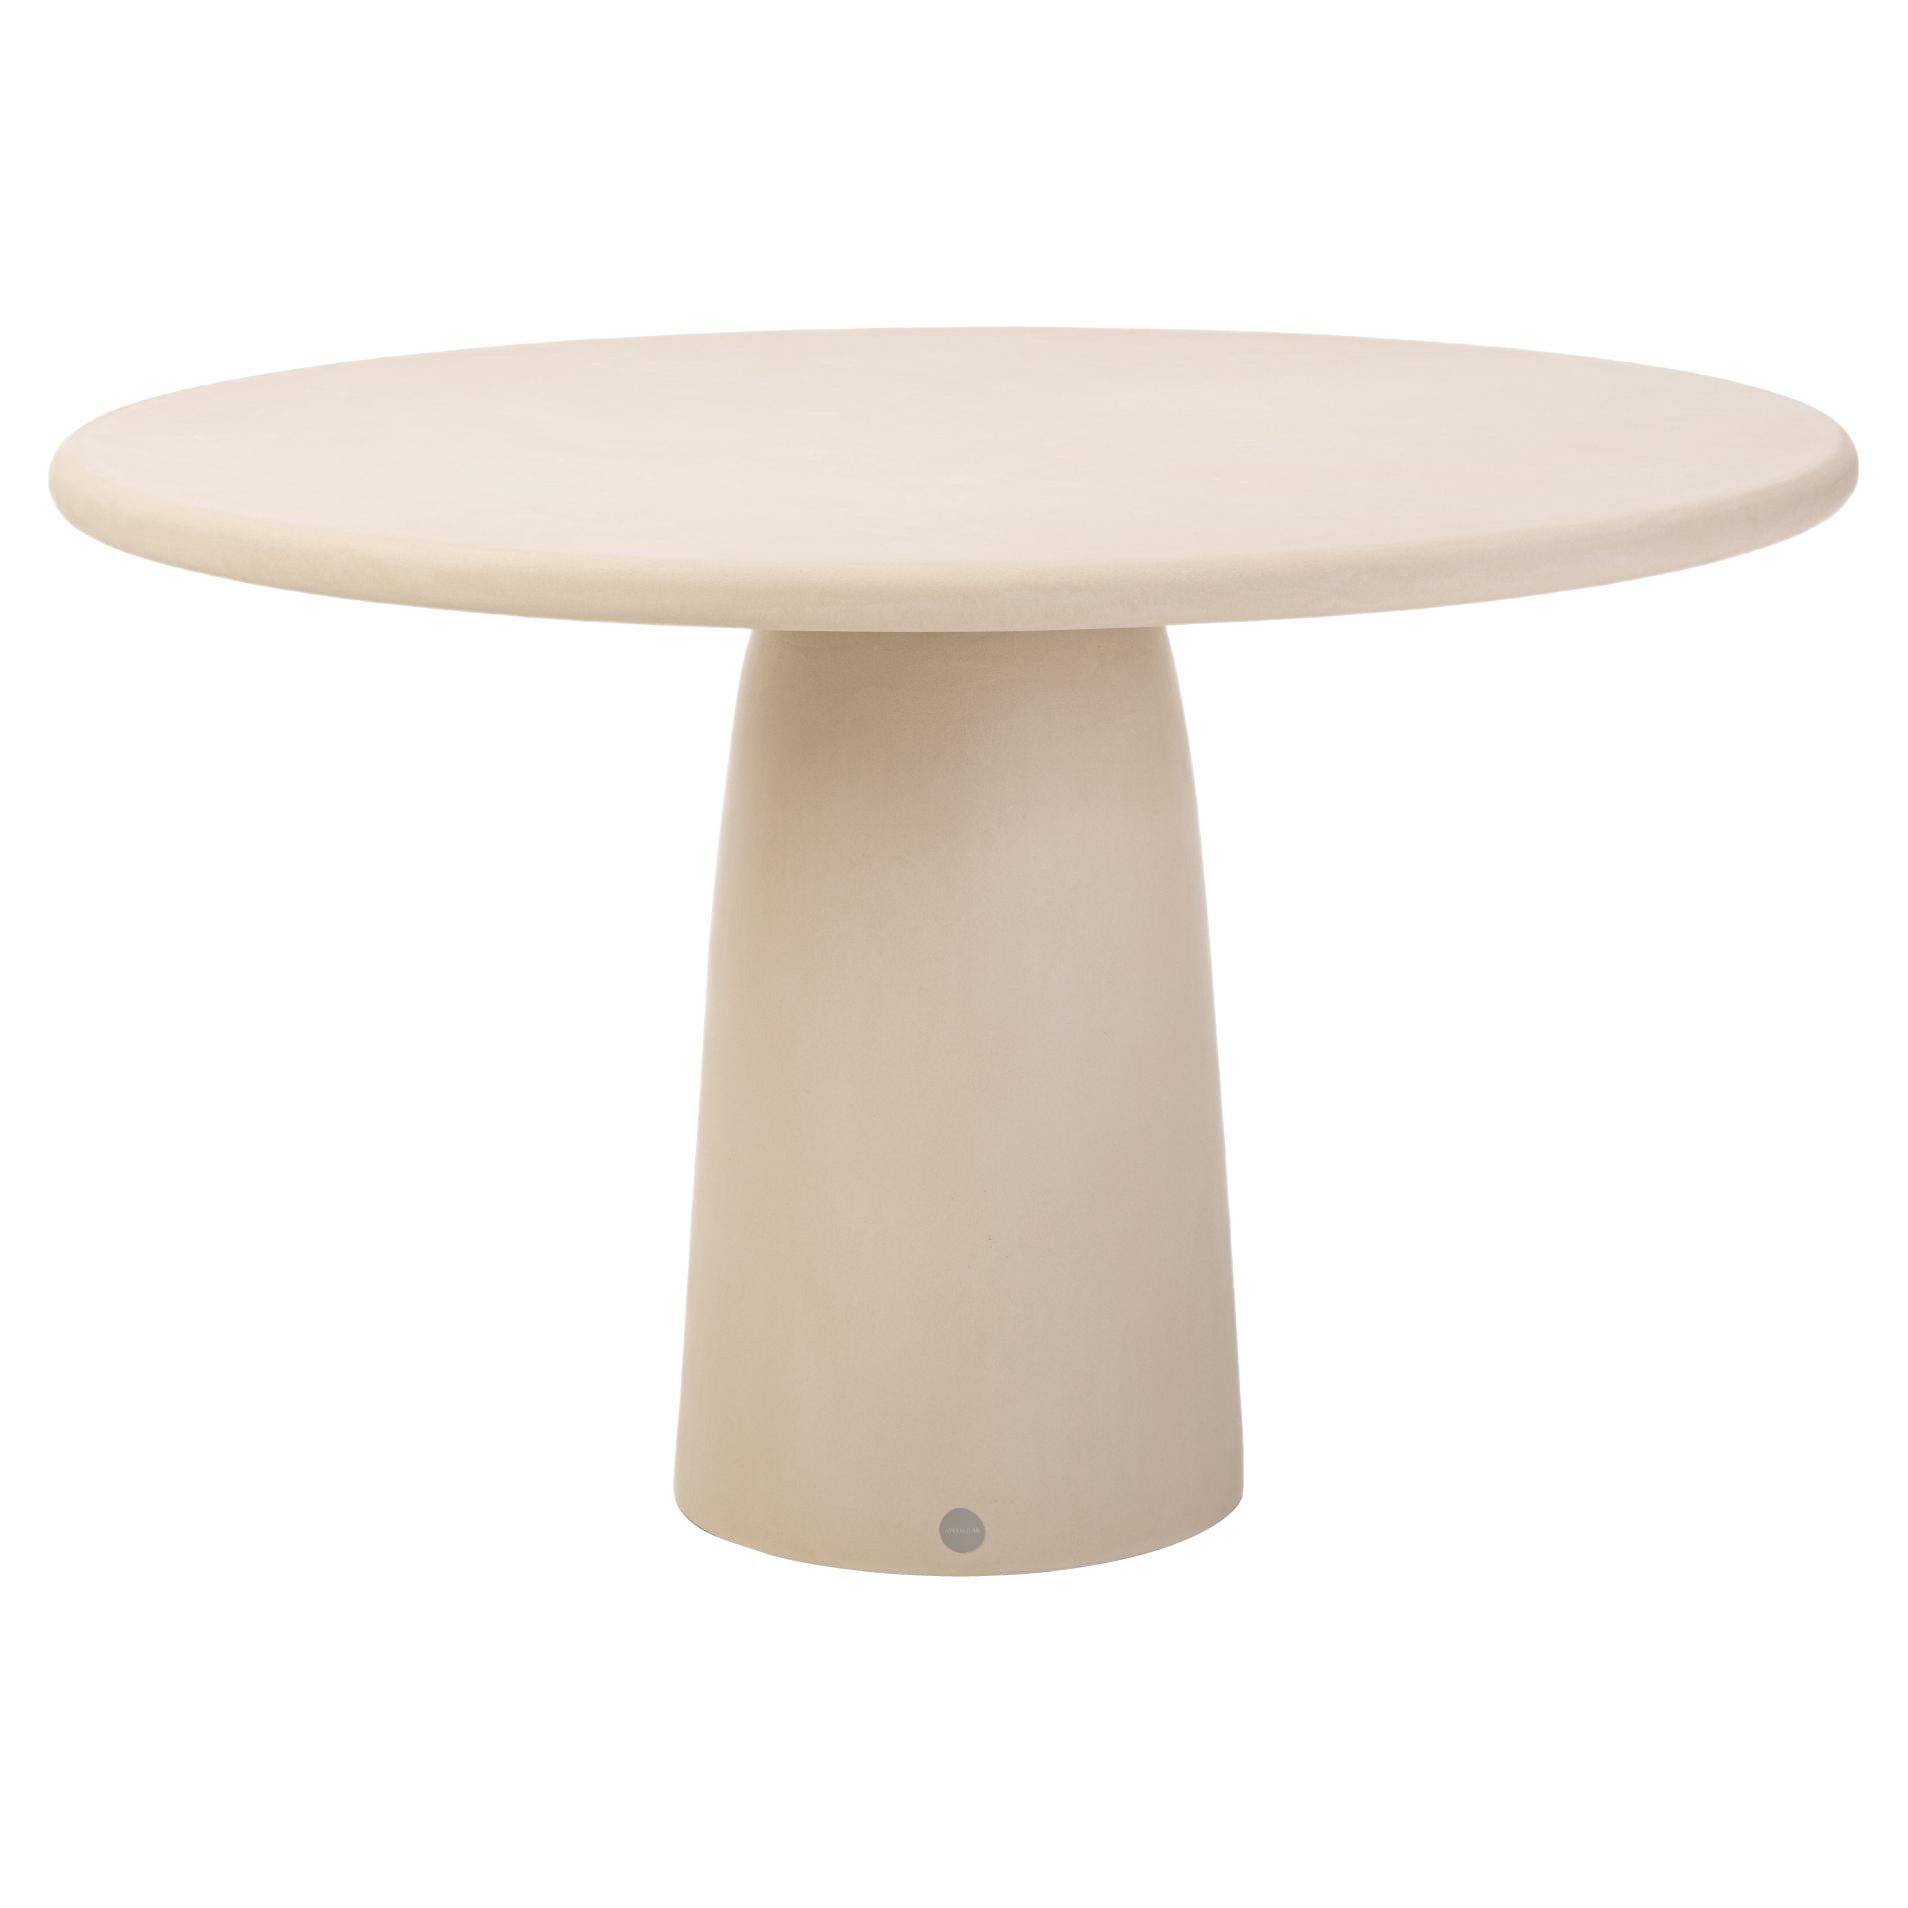 Contemporary Round Natural Plaster "Menhir" Table 140cm by Isabelle Beaumont For Sale